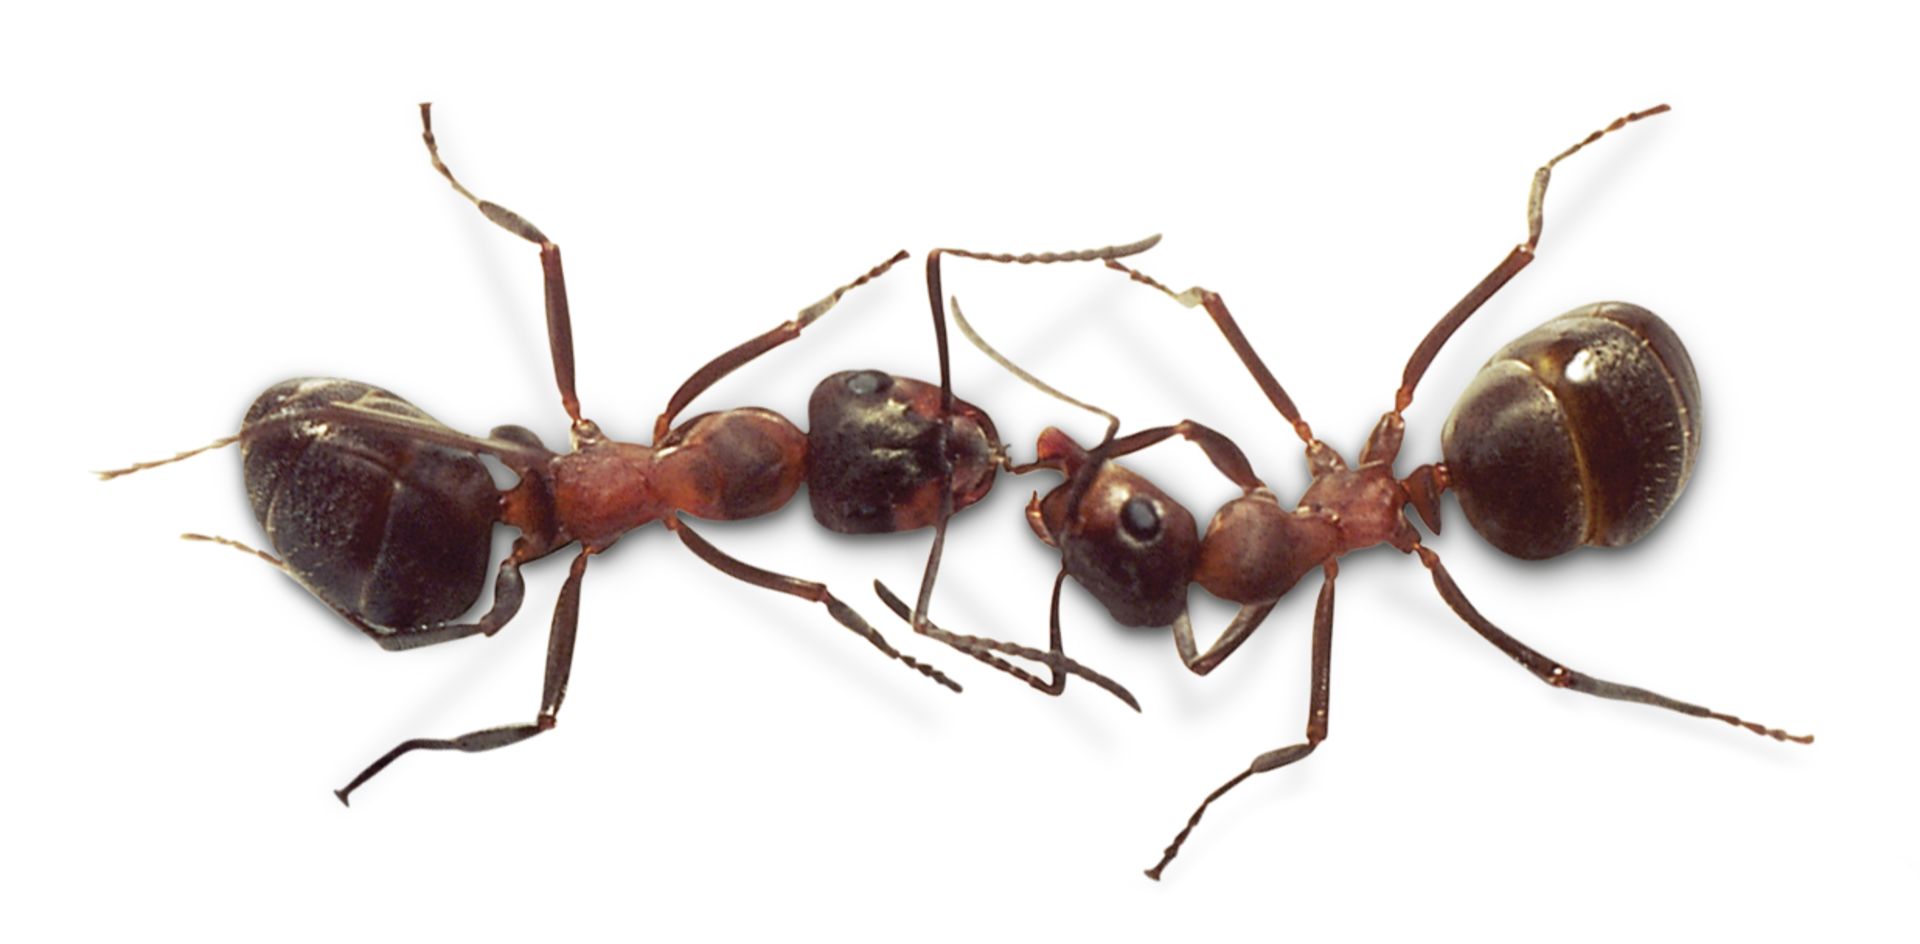 How do ants communicate to other ants about where food is present?